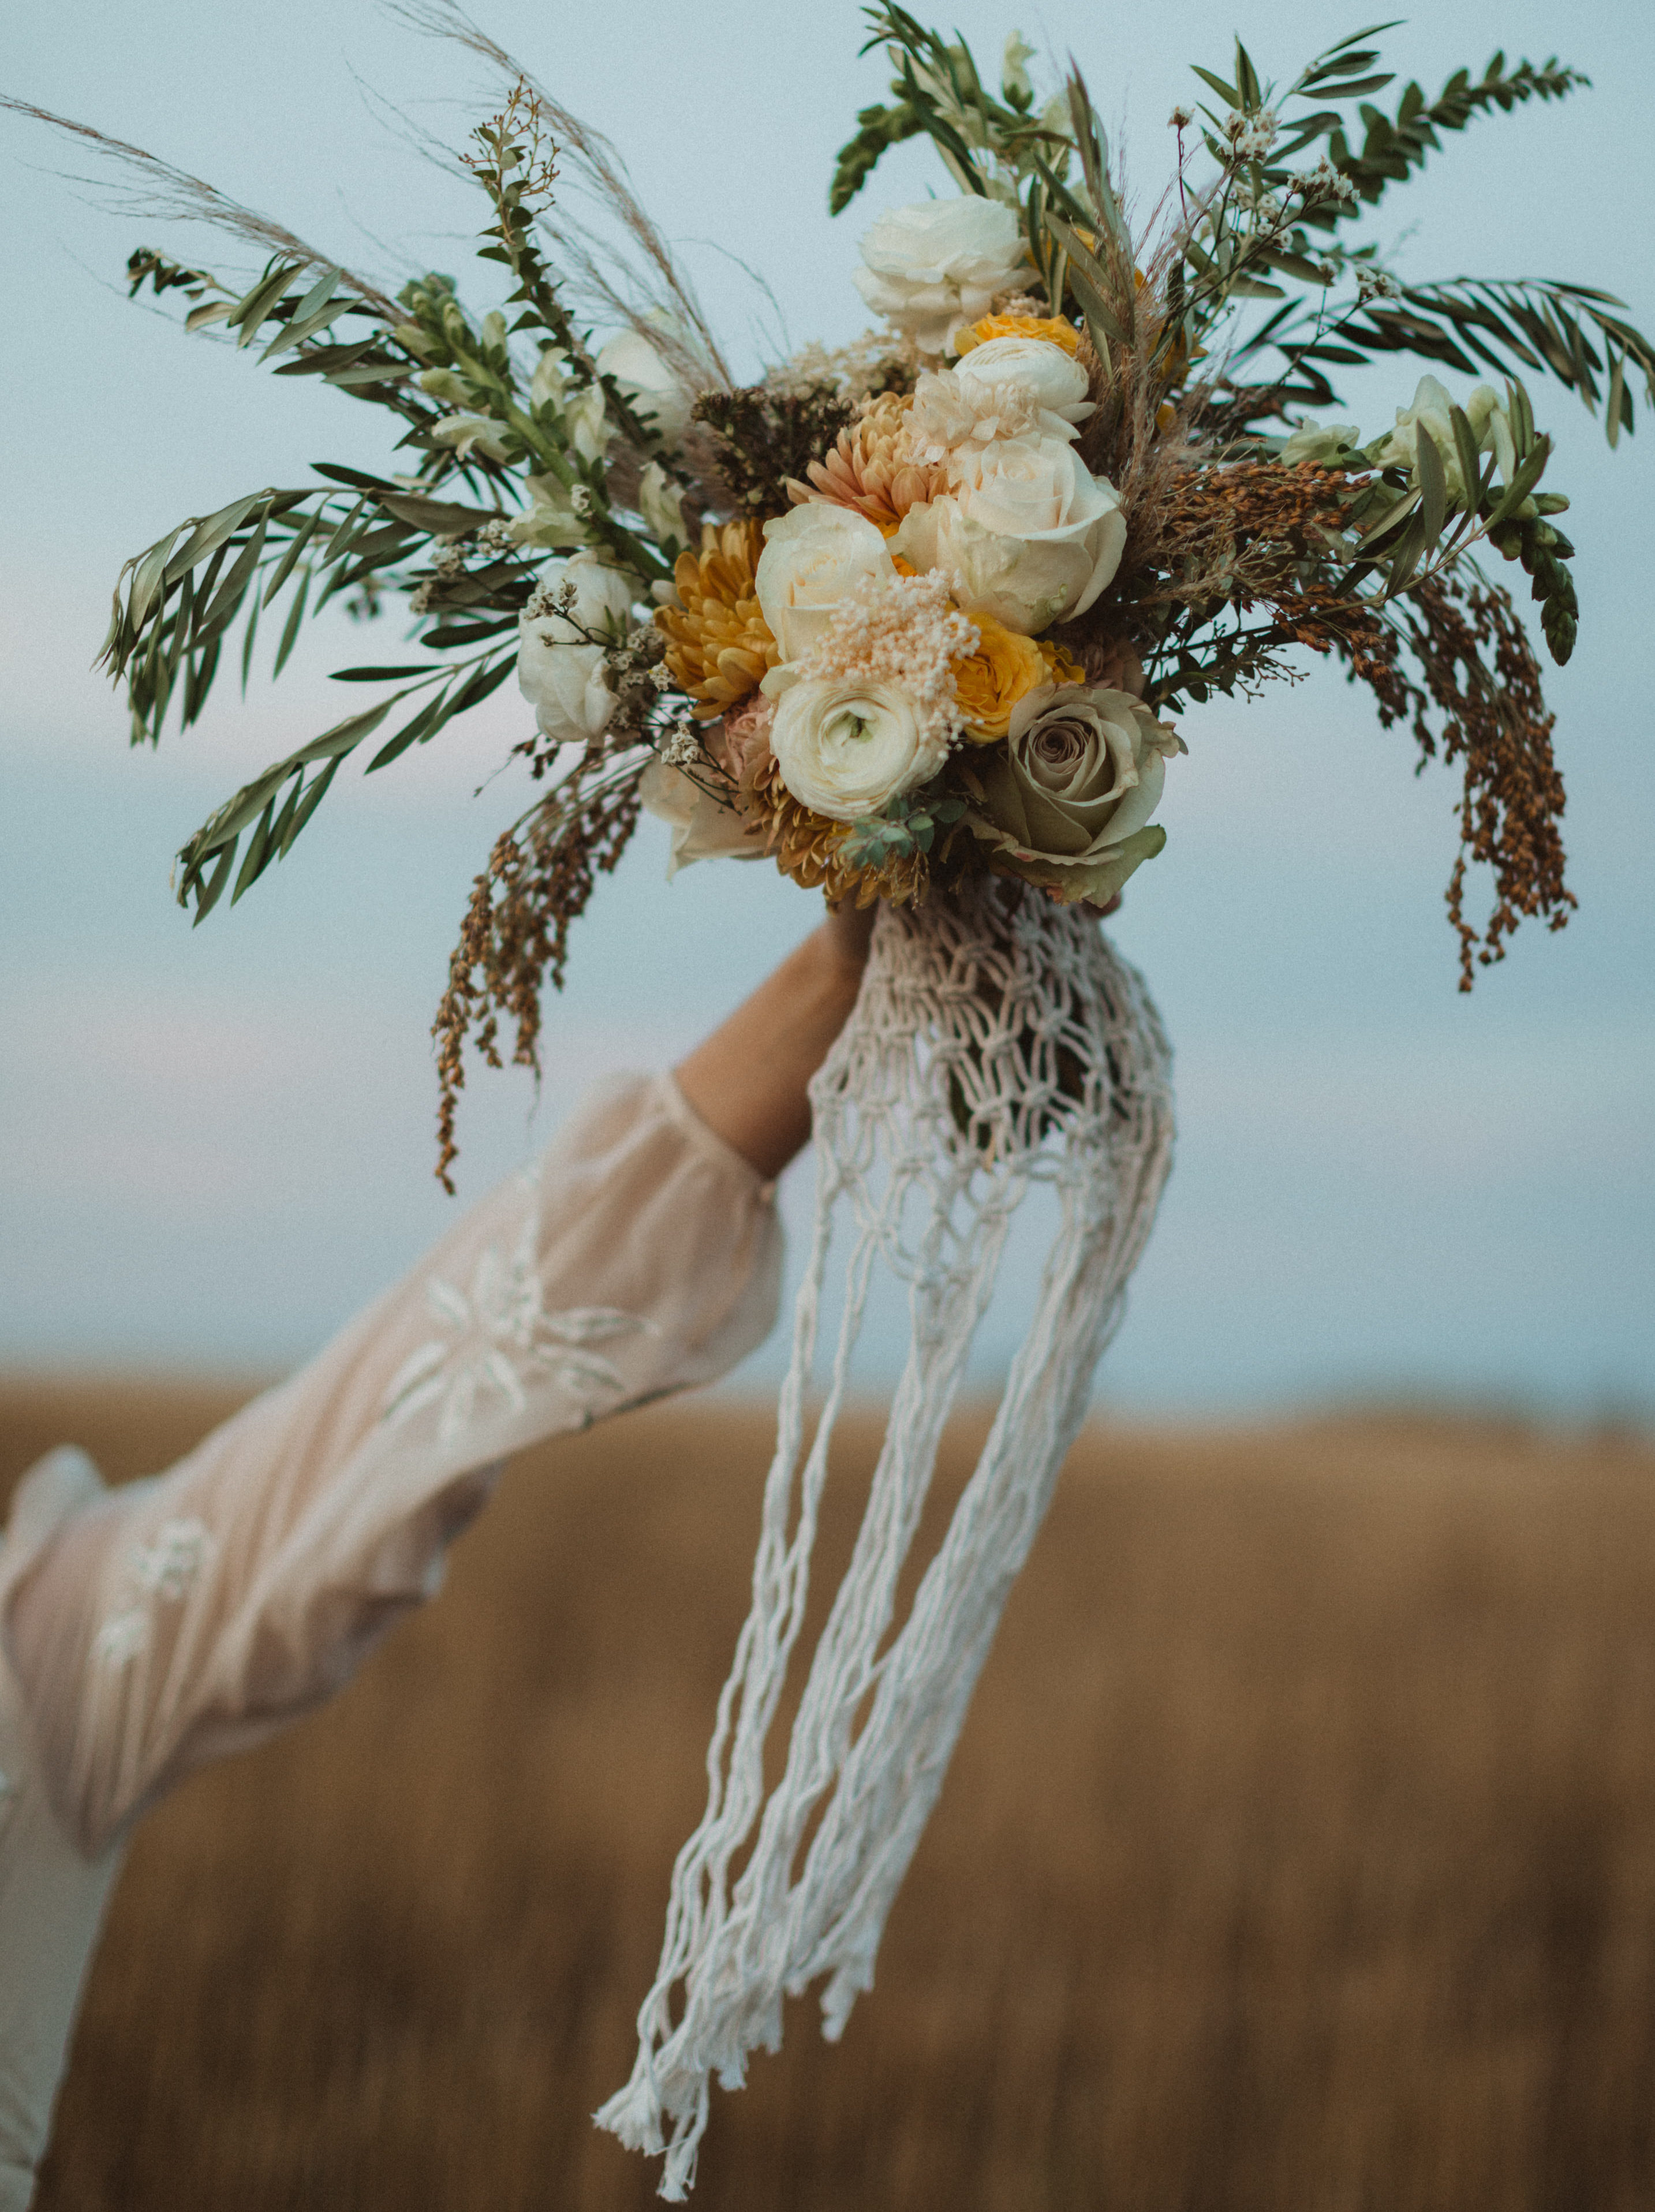 Crafty Liv created beautiful custom macrame pieces for elopements, bouquet wrap, plant hangers, and macrame hangings to hang on the trees and was chosen as one of Alberta's top elopement vendors.